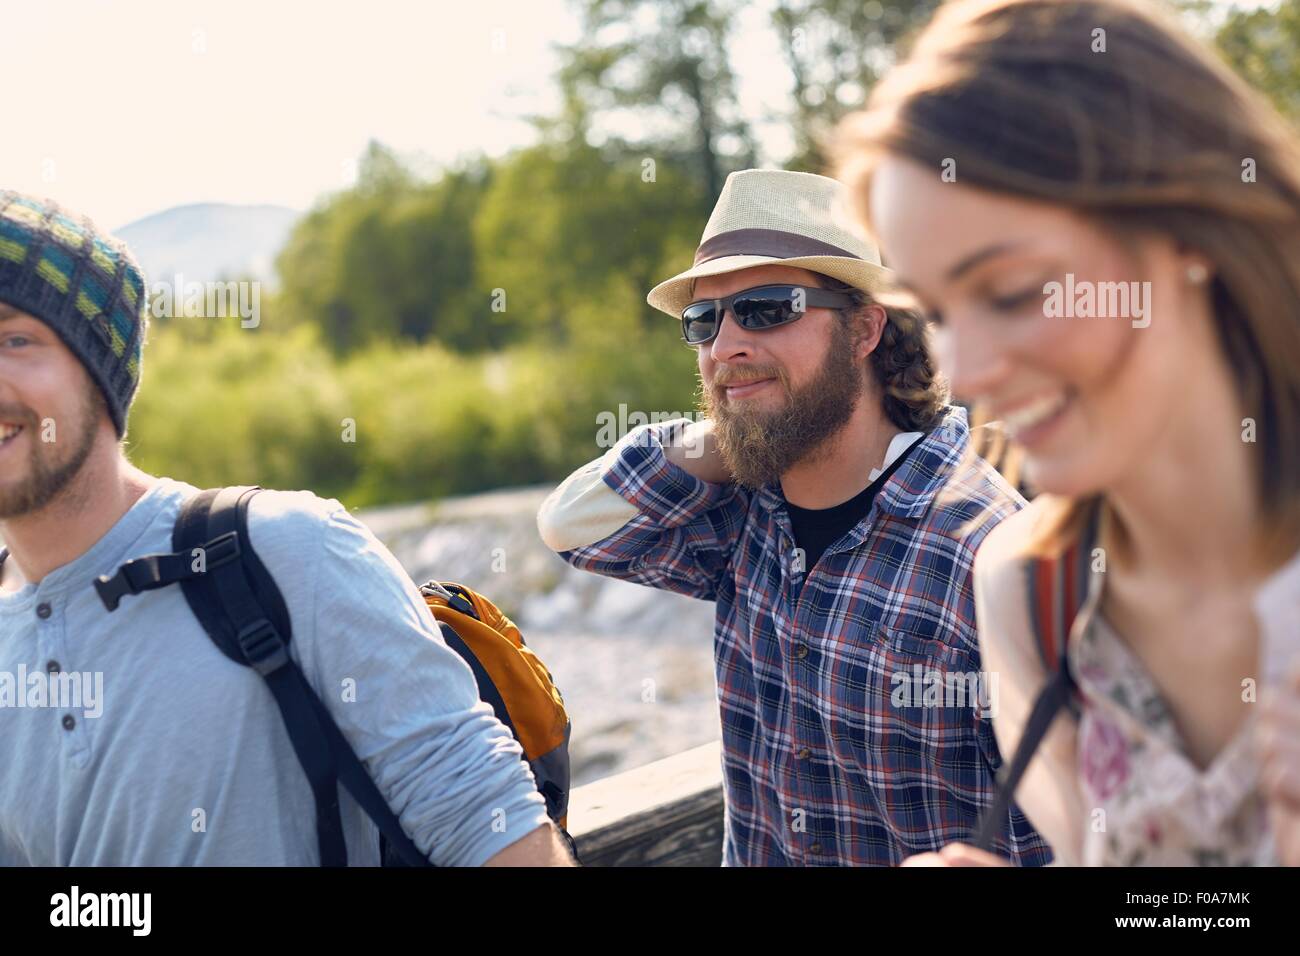 Three people walking together carrying backpacks, smiling Stock Photo